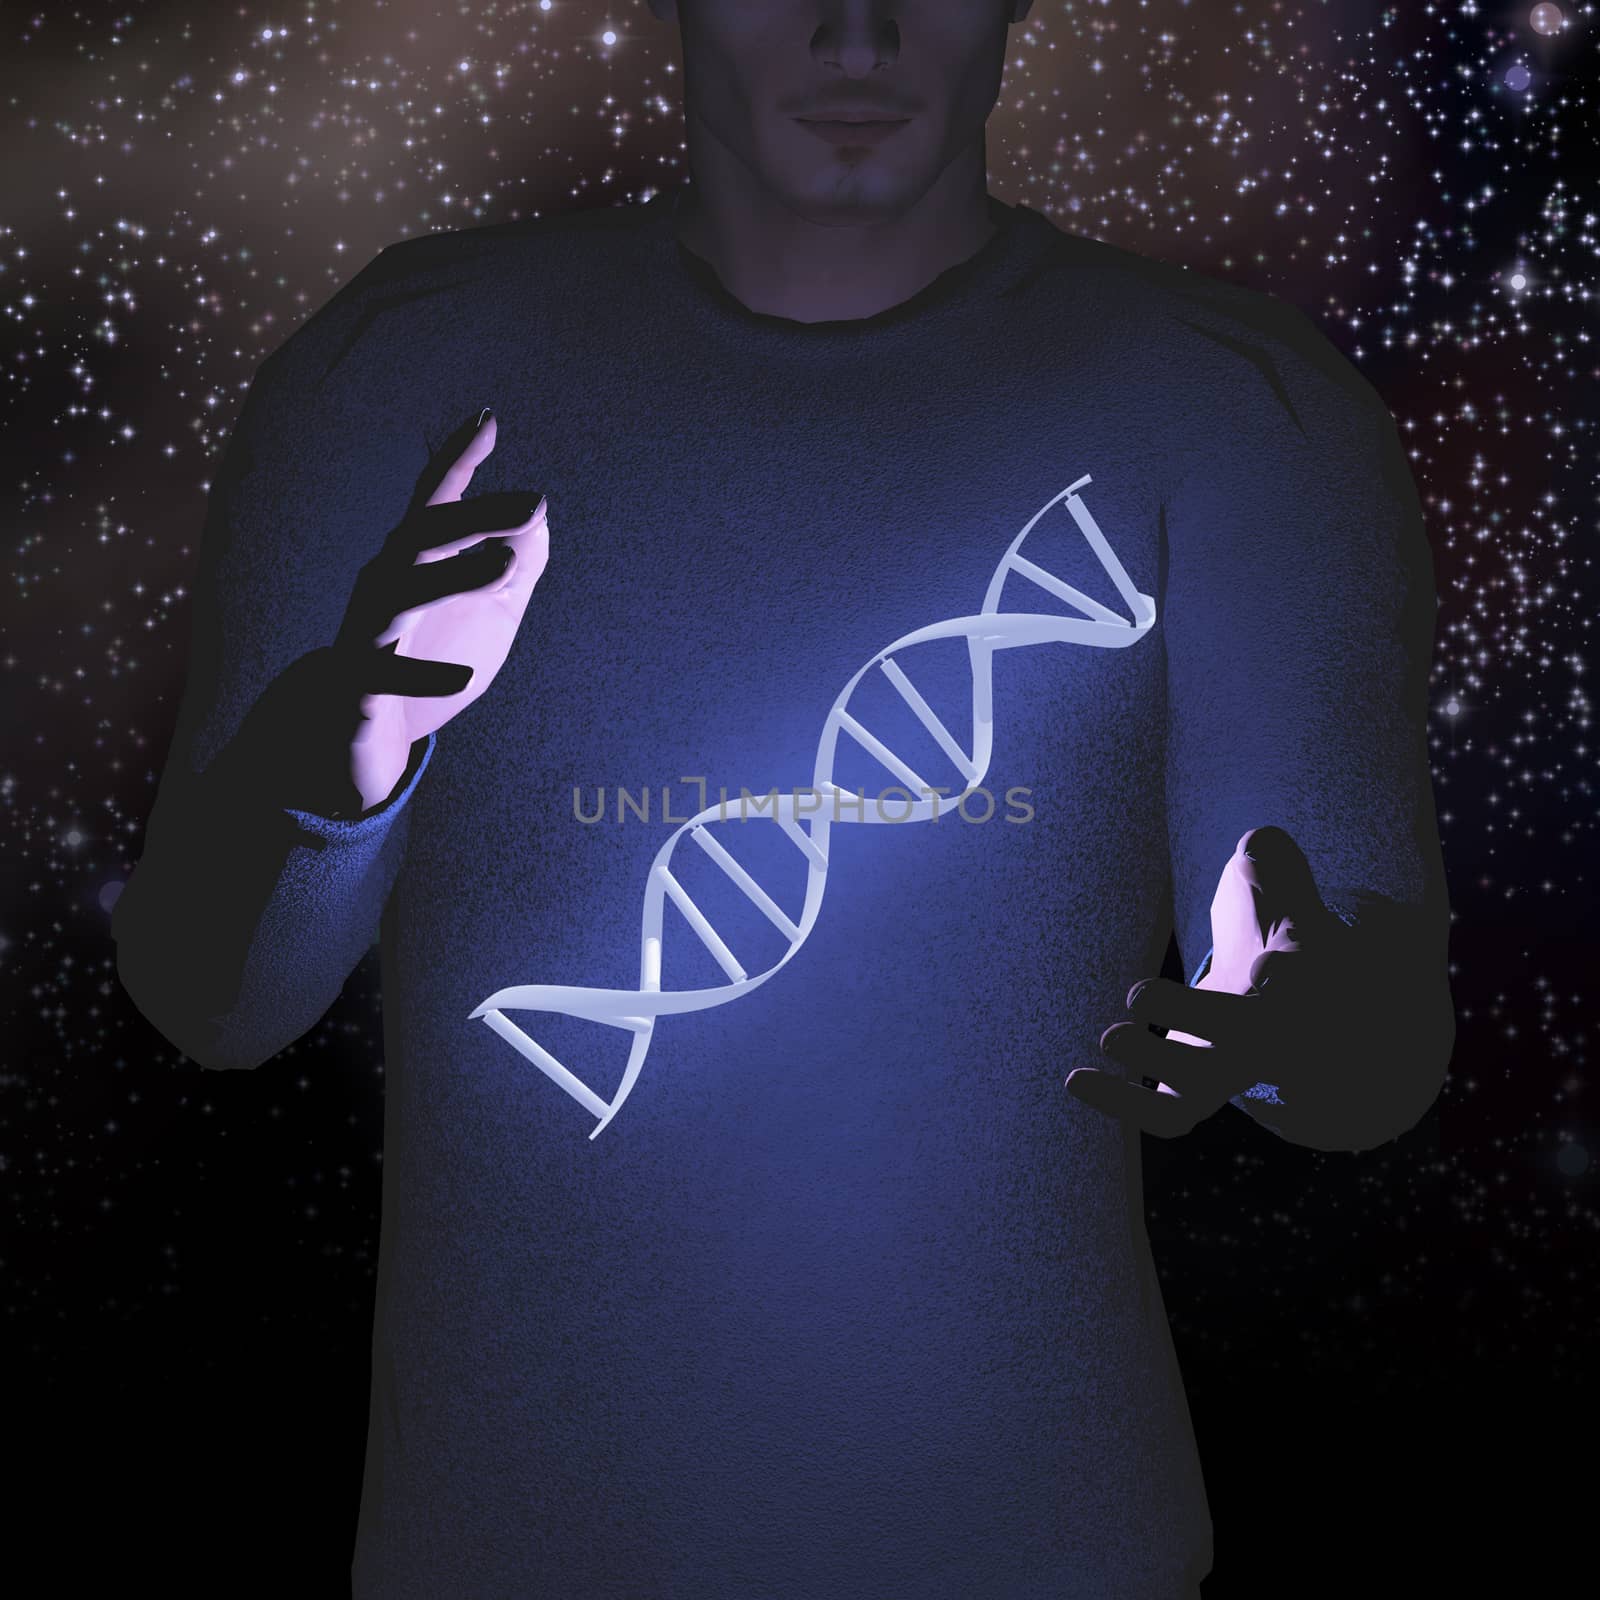 DNA and Stars in Human Hands